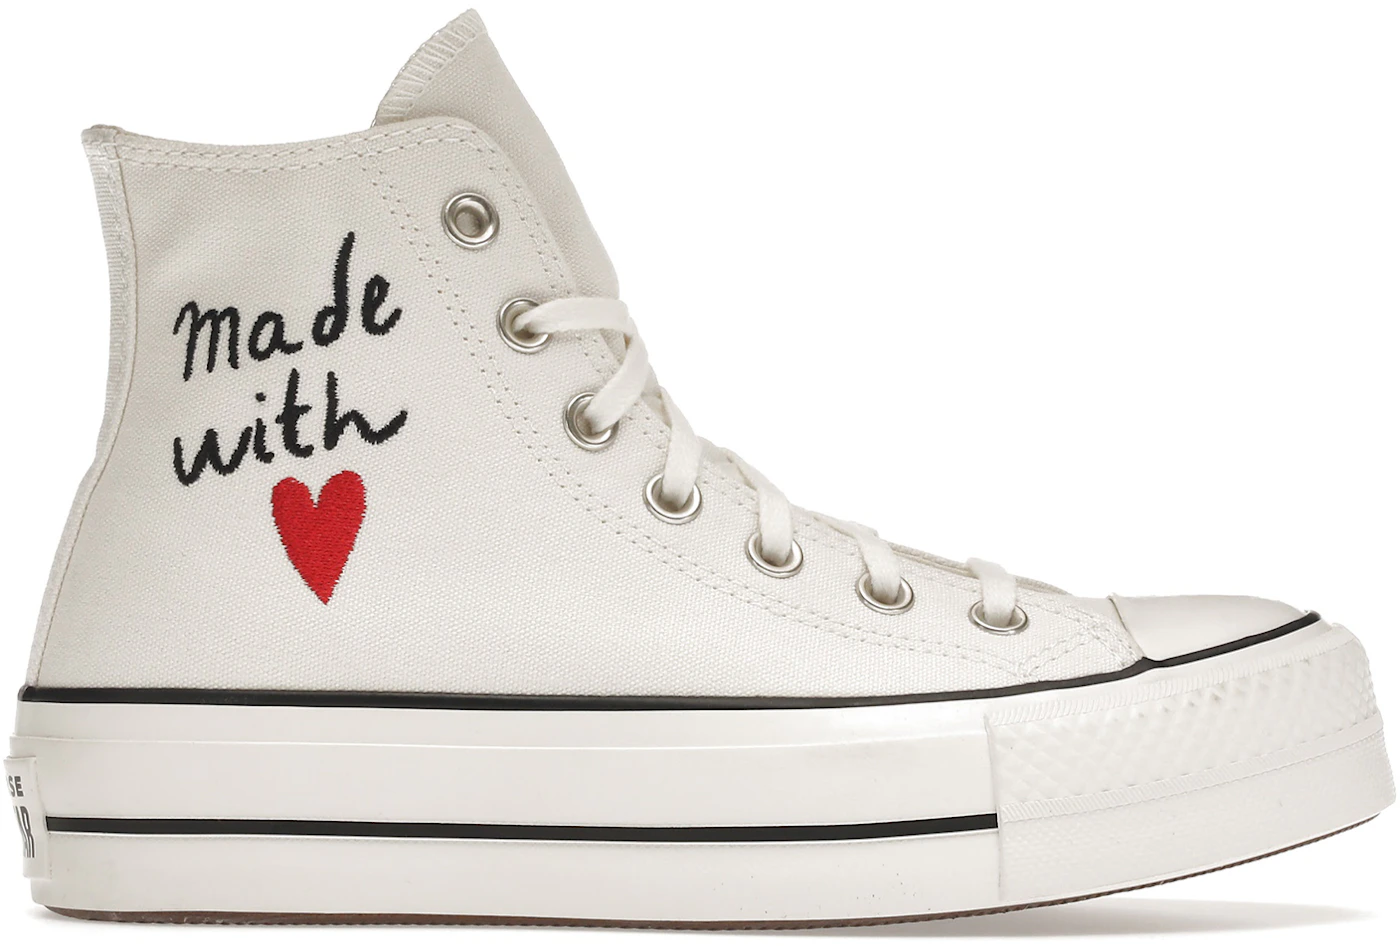 The Chuck Taylor Upgrade We're Loving: The Mid-Top - The Mom Edit